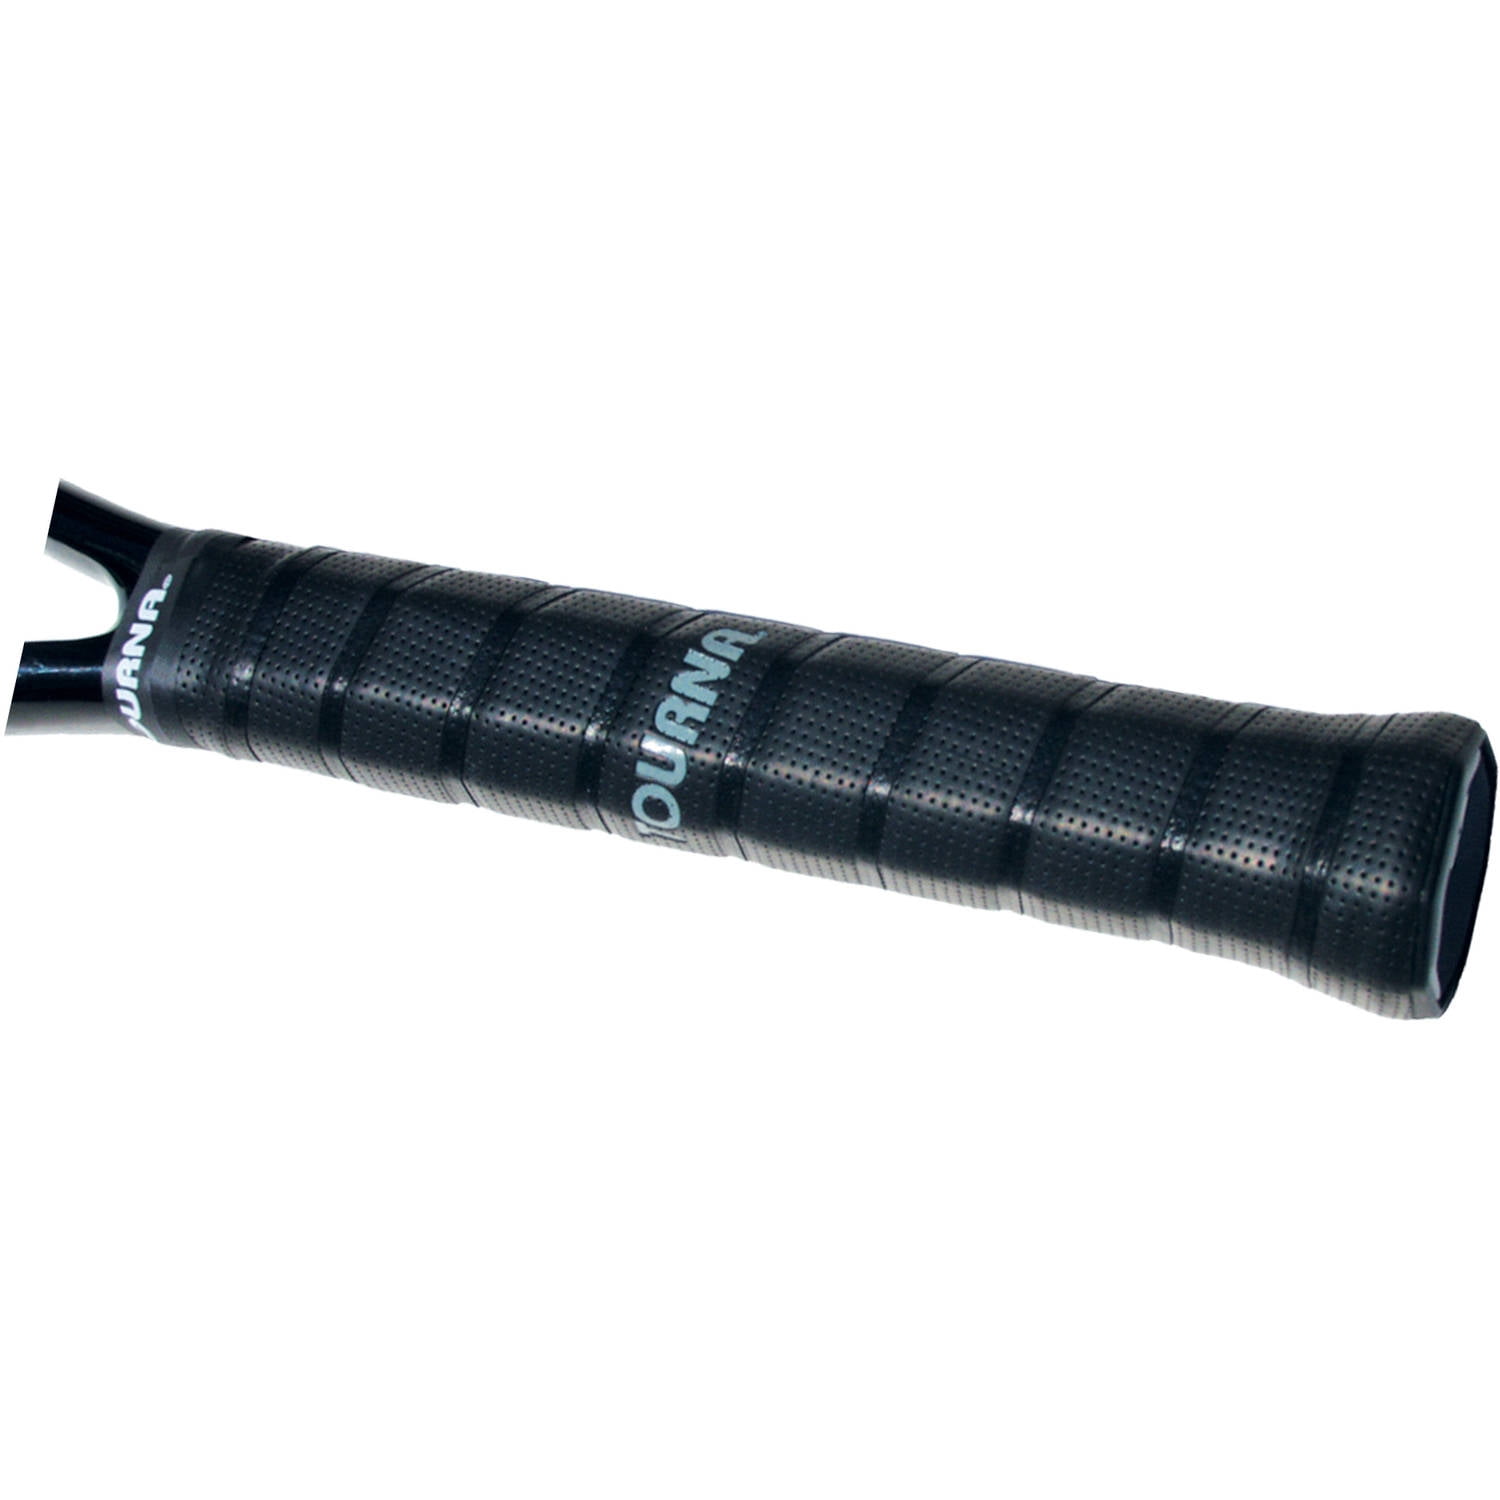 Pack of 2 Black Tourna Pro Tour Thin Replacement Grip 2.54 cm x 110 cm 